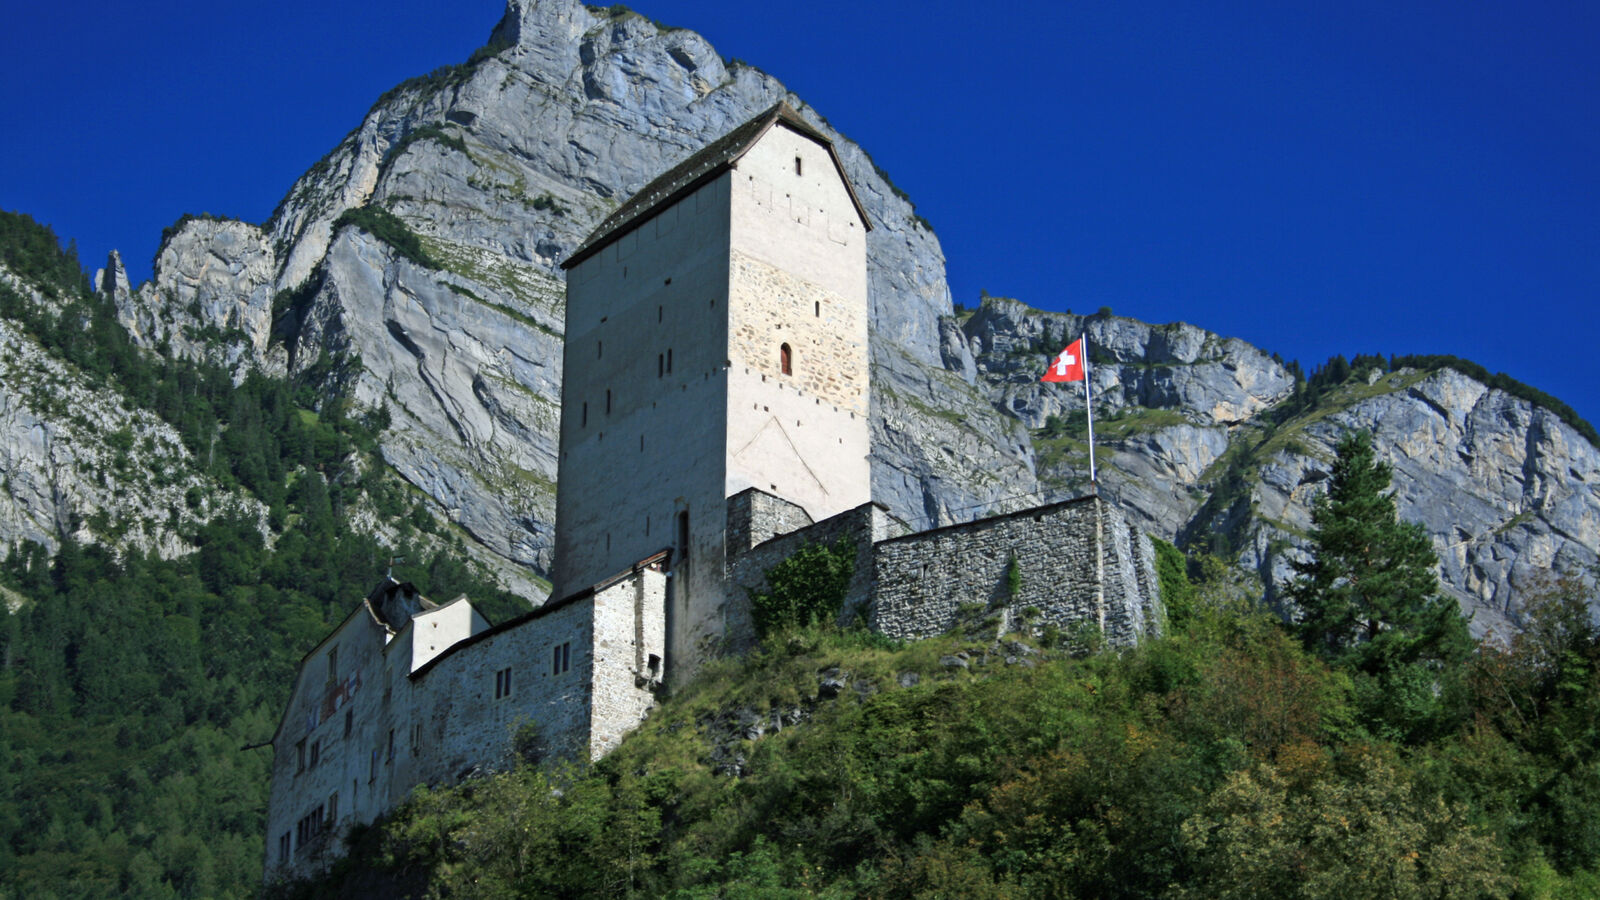 The museum is located in the Sargans Castle